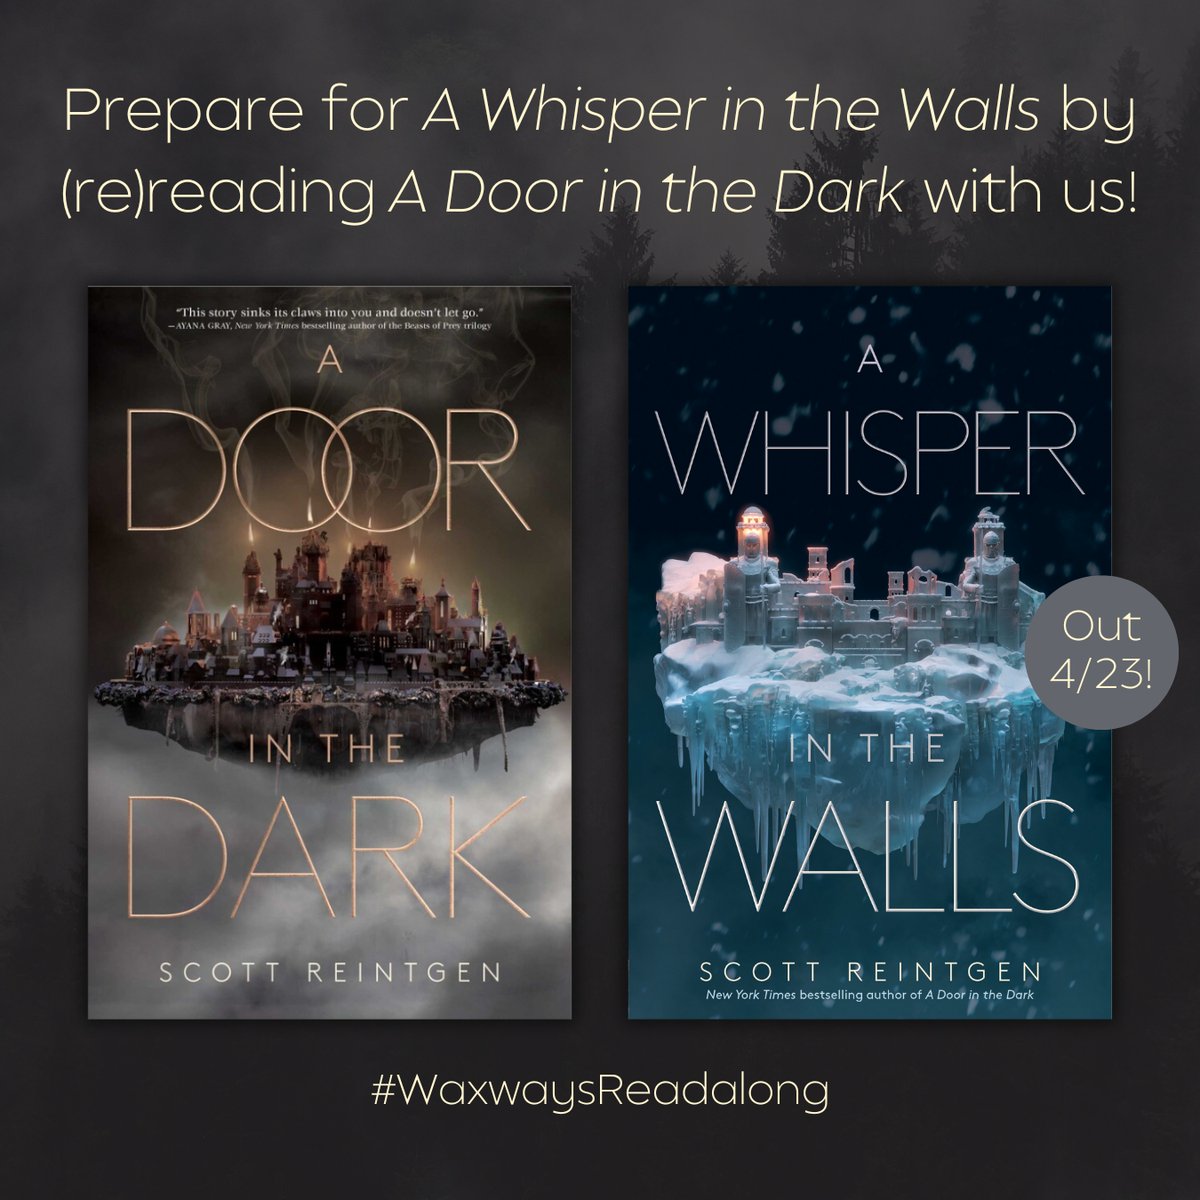 Less than two weeks (!!!) until #AWhisperInTheWalls is here! Are you preparing by (re)reading #ADoorInTheDark with us? spr.ly/6016wY6jG @Scott_Thought #WaxwaysReadalong